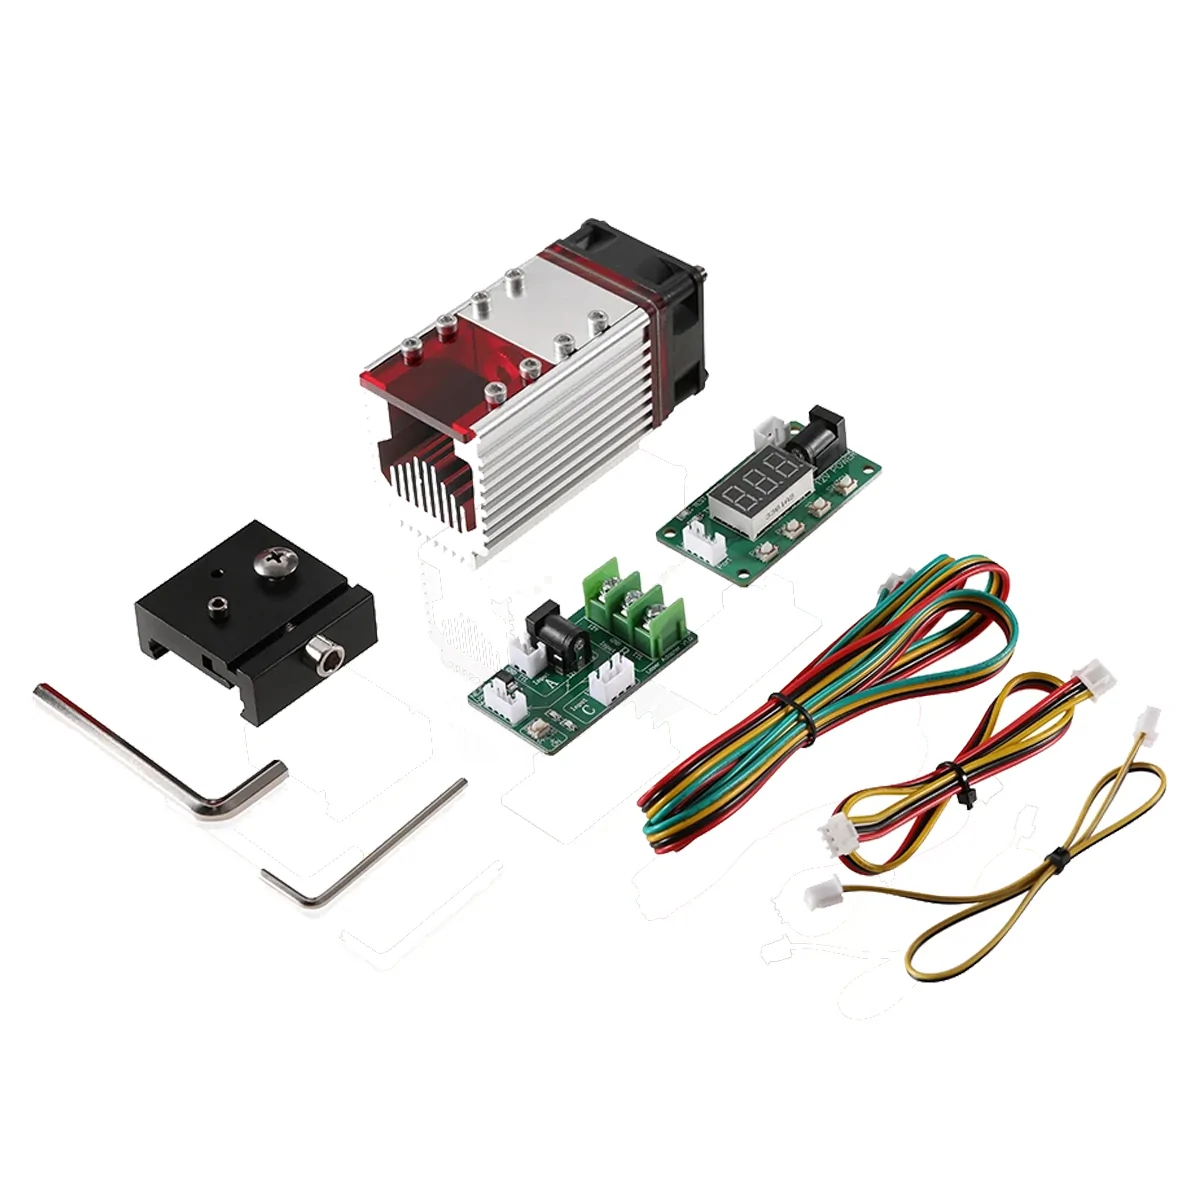 Find NEJE A40640 Laser Engraver Cutter Module Kits Double Laser Beam 15w Output Laser For DIY Laser Engraving Machine Wood Cutter Cutting Tool for Sale on Gipsybee.com